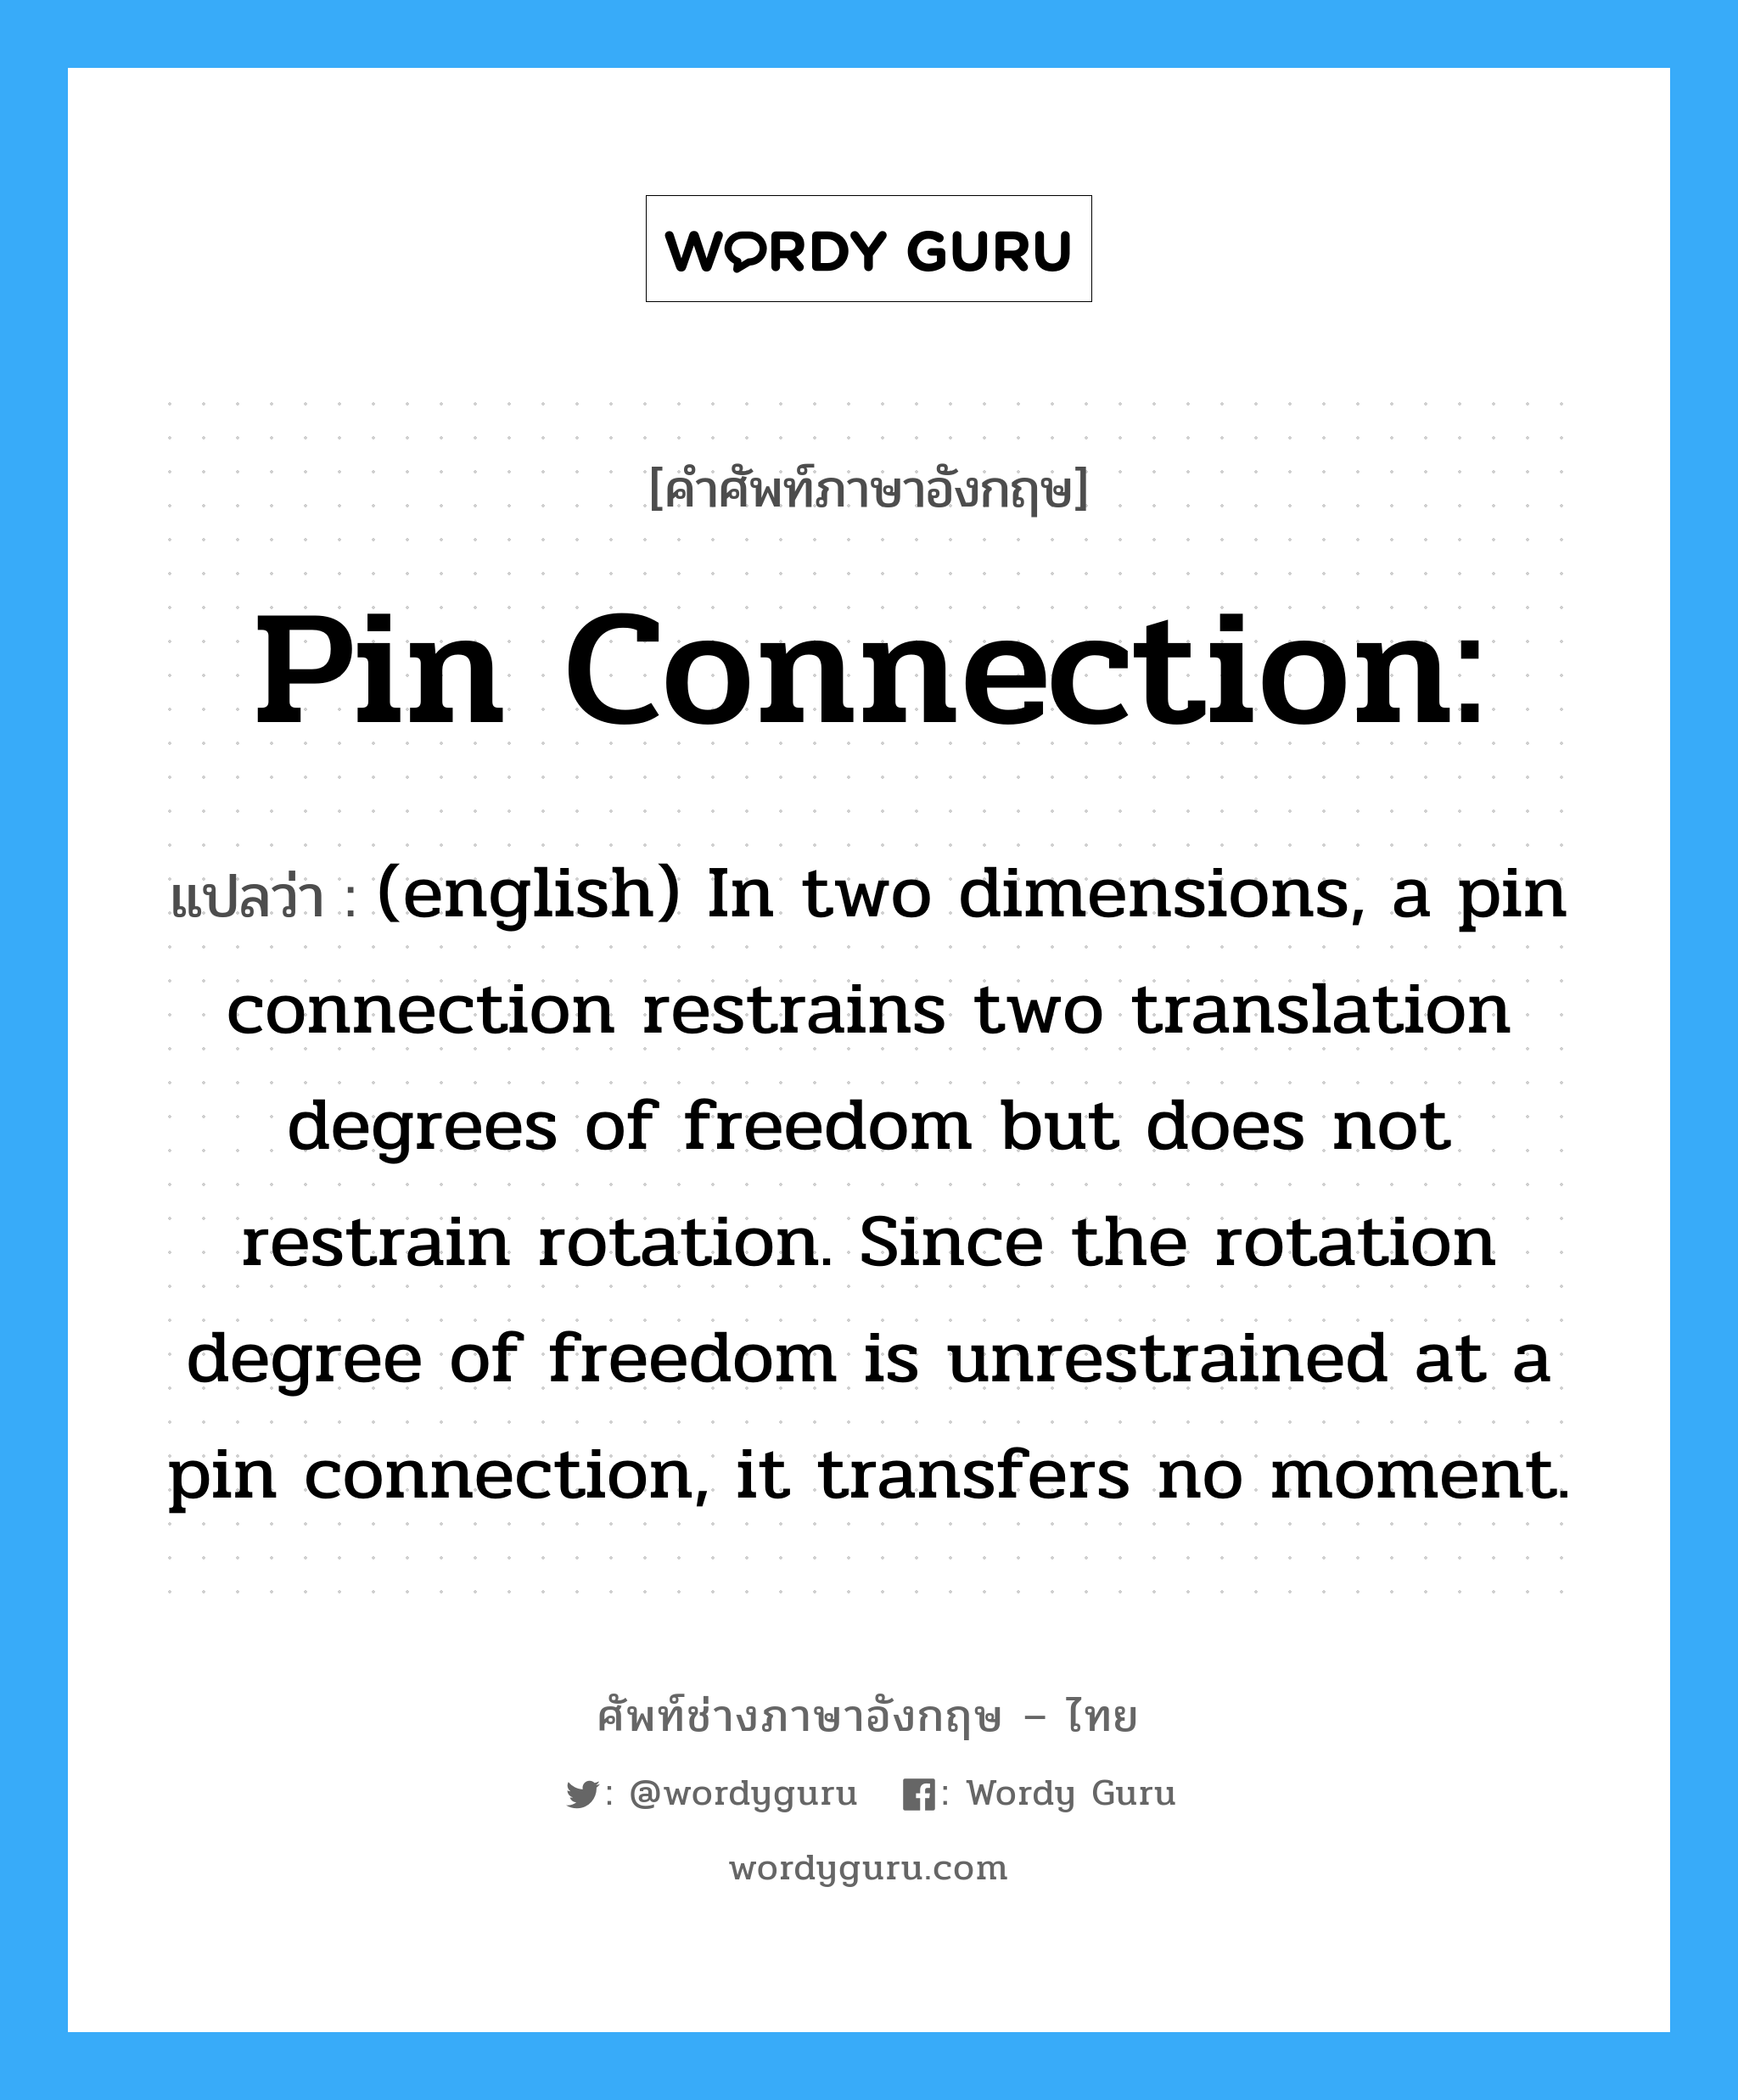 (english) In two dimensions, a pin connection restrains two translation degrees of freedom but does not restrain rotation. Since the rotation degree of freedom is unrestrained at a pin connection, it transfers no moment. ภาษาอังกฤษ?, คำศัพท์ช่างภาษาอังกฤษ - ไทย (english) In two dimensions, a pin connection restrains two translation degrees of freedom but does not restrain rotation. Since the rotation degree of freedom is unrestrained at a pin connection, it transfers no moment. คำศัพท์ภาษาอังกฤษ (english) In two dimensions, a pin connection restrains two translation degrees of freedom but does not restrain rotation. Since the rotation degree of freedom is unrestrained at a pin connection, it transfers no moment. แปลว่า Pin connection: